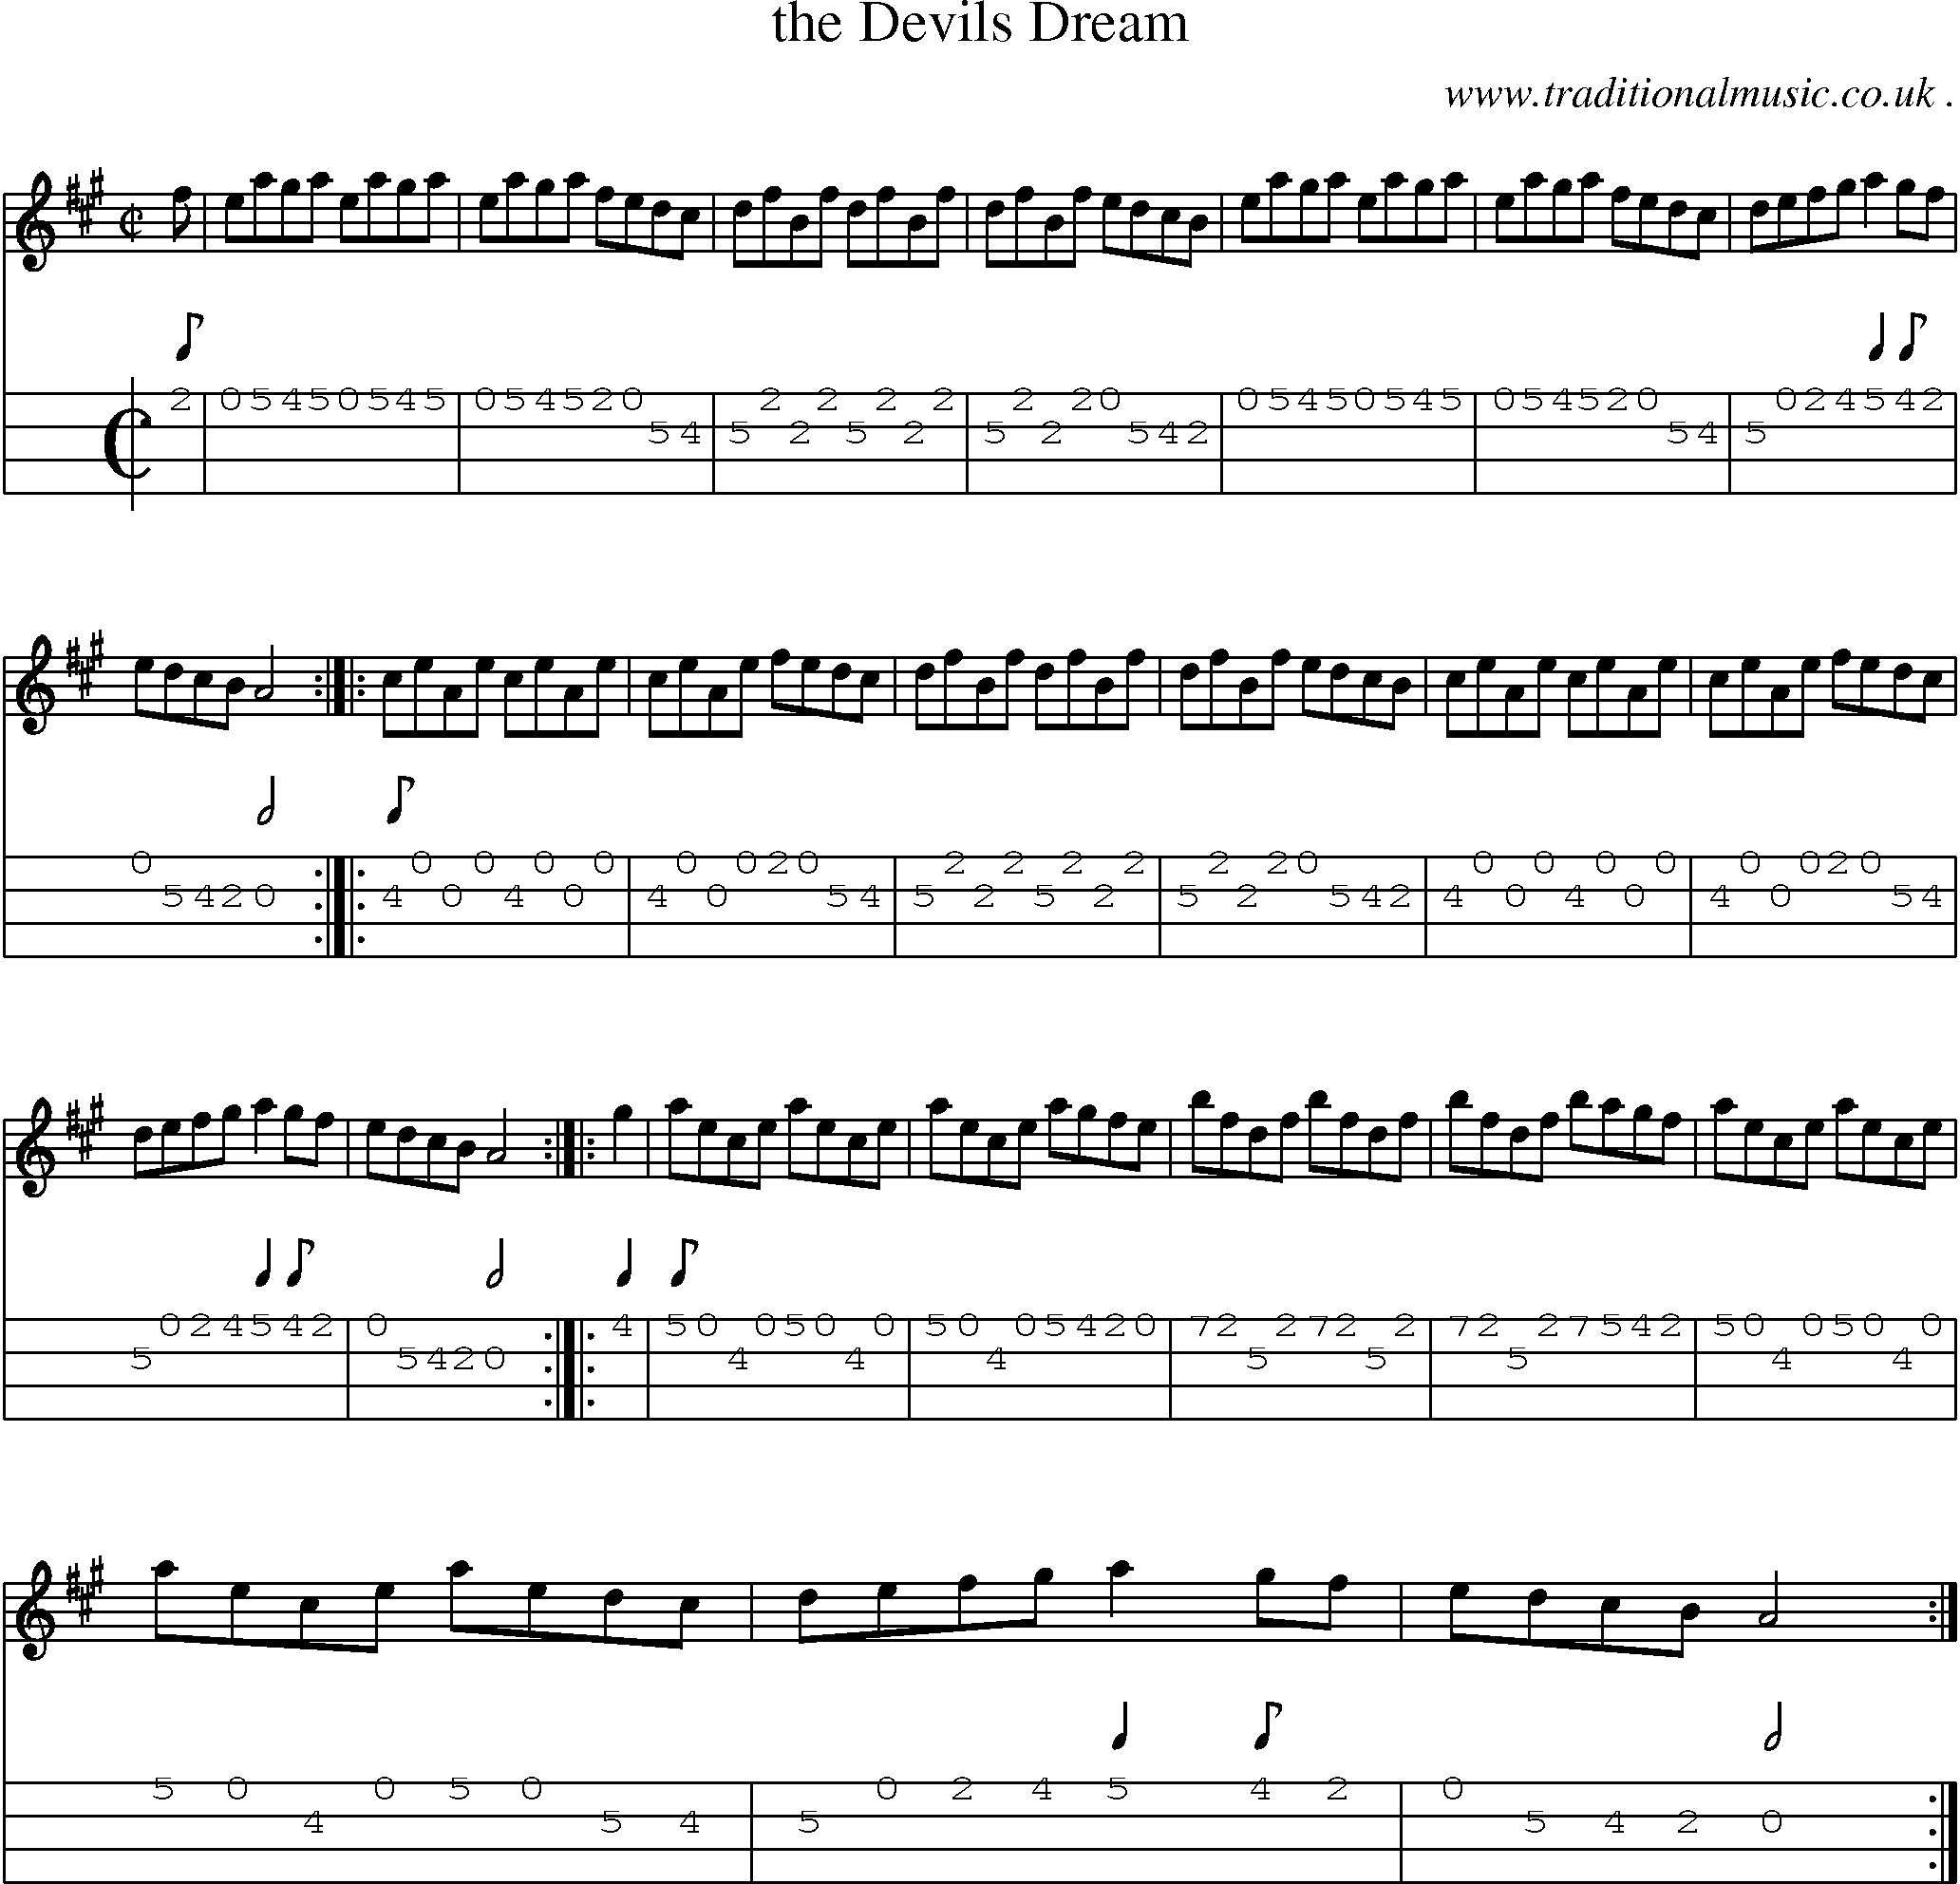 Sheet-Music and Mandolin Tabs for The Devils Dream